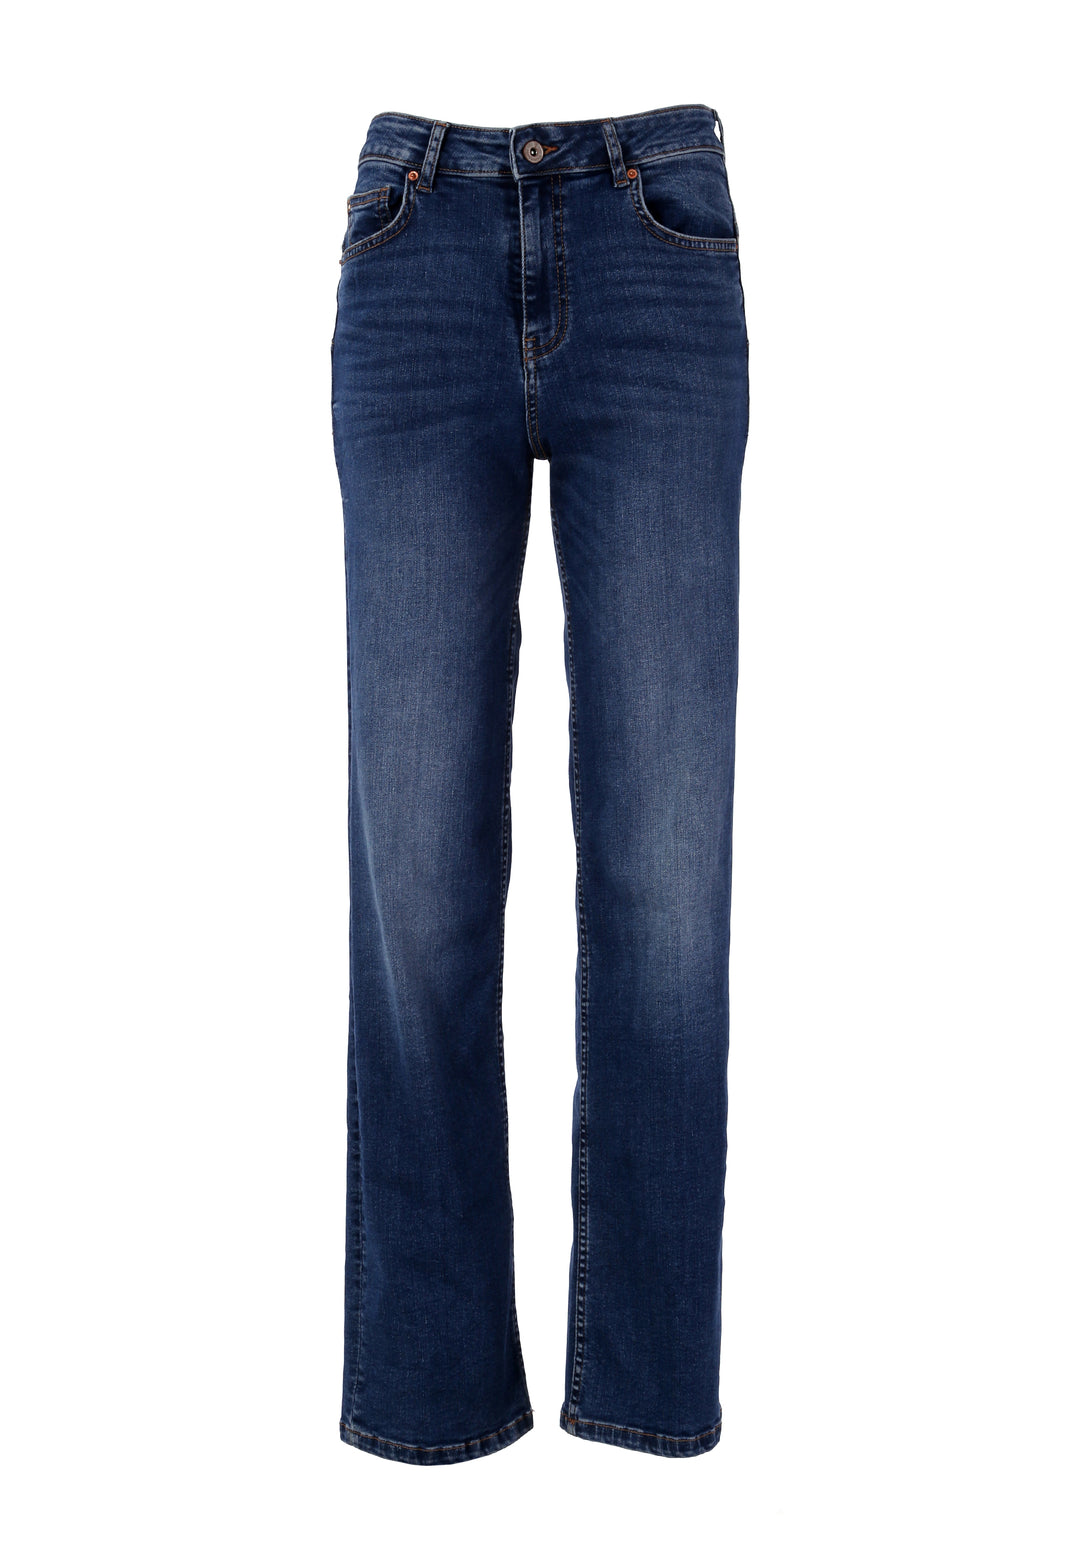 Jeans regular fit made in denim with middle and stone wash Fracomina FP000V8050D40402-349-1